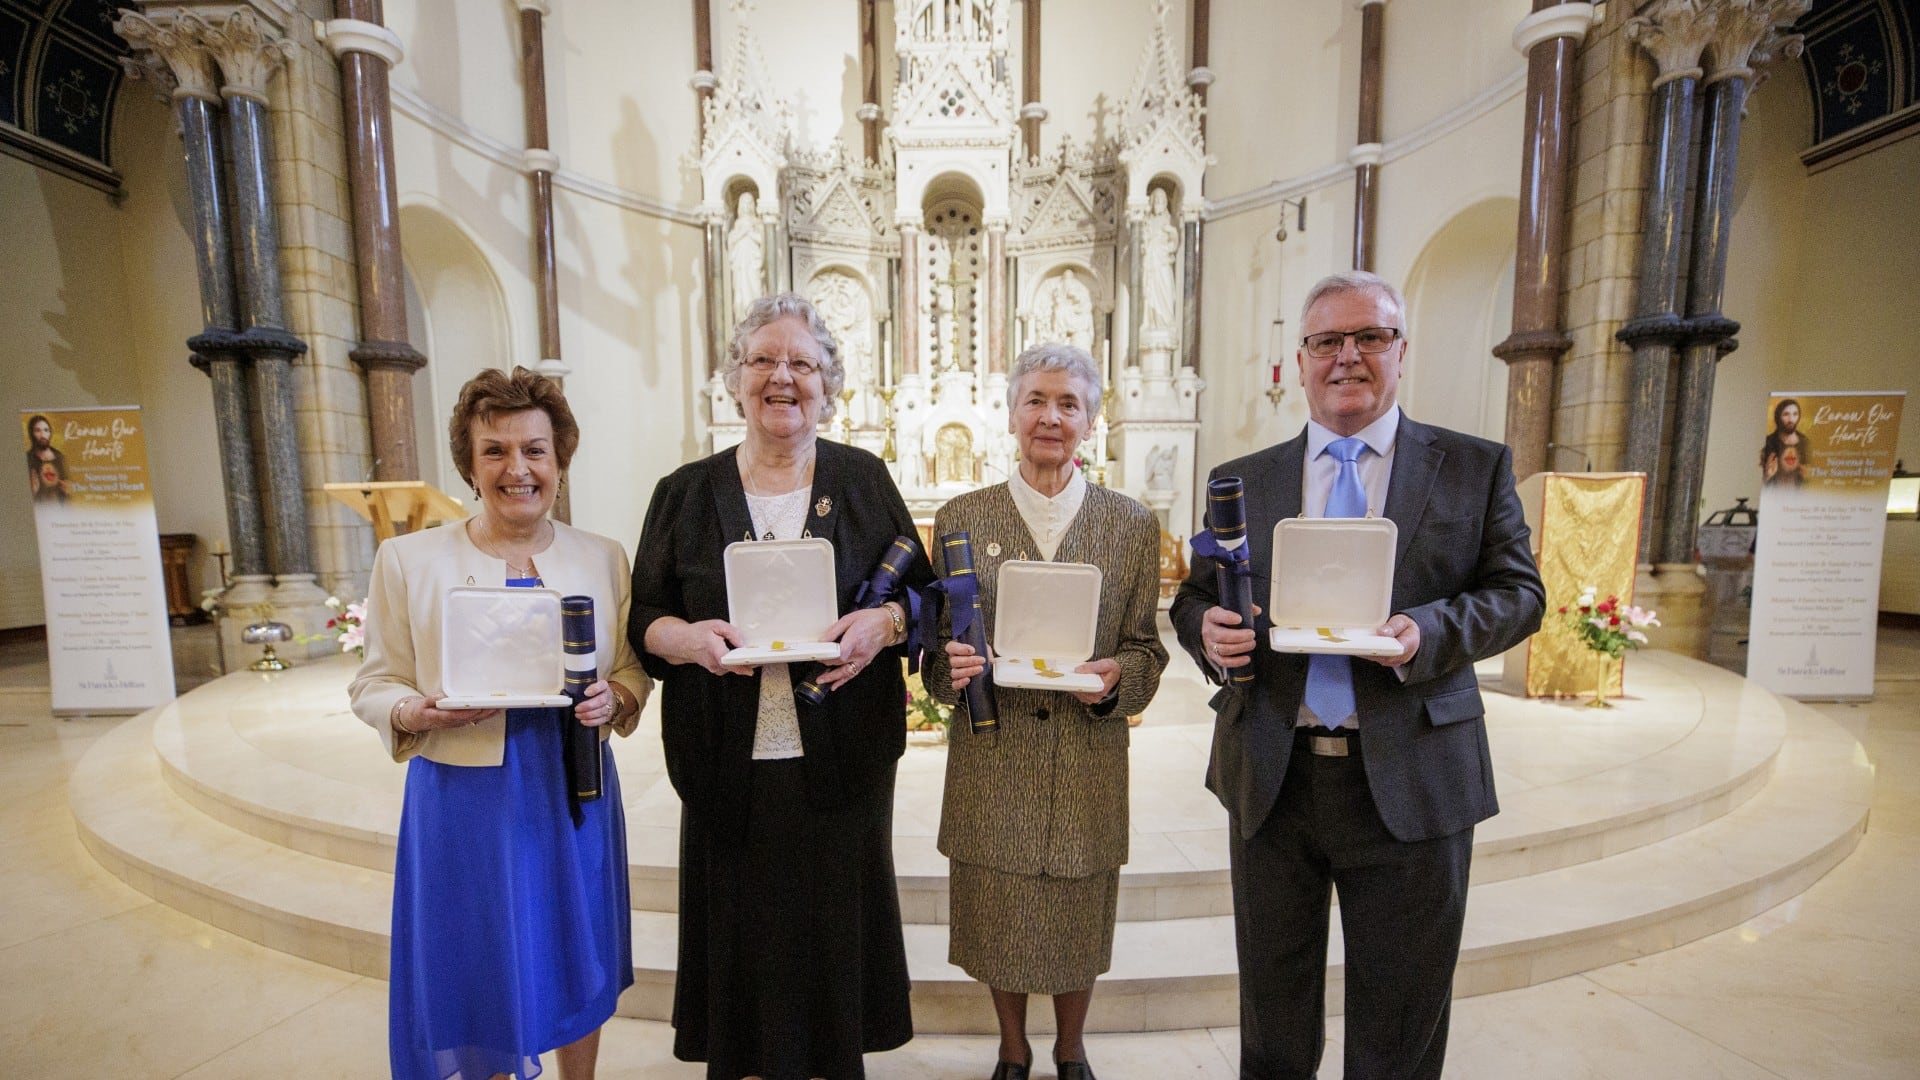 Pictured receiving their Papal Medal last week in St Patrick's Church, Donegall Street, (l-r) were Rita Goldsmith, Sr Mary Carlin, Sr Teresa O'Neill and Brian White.